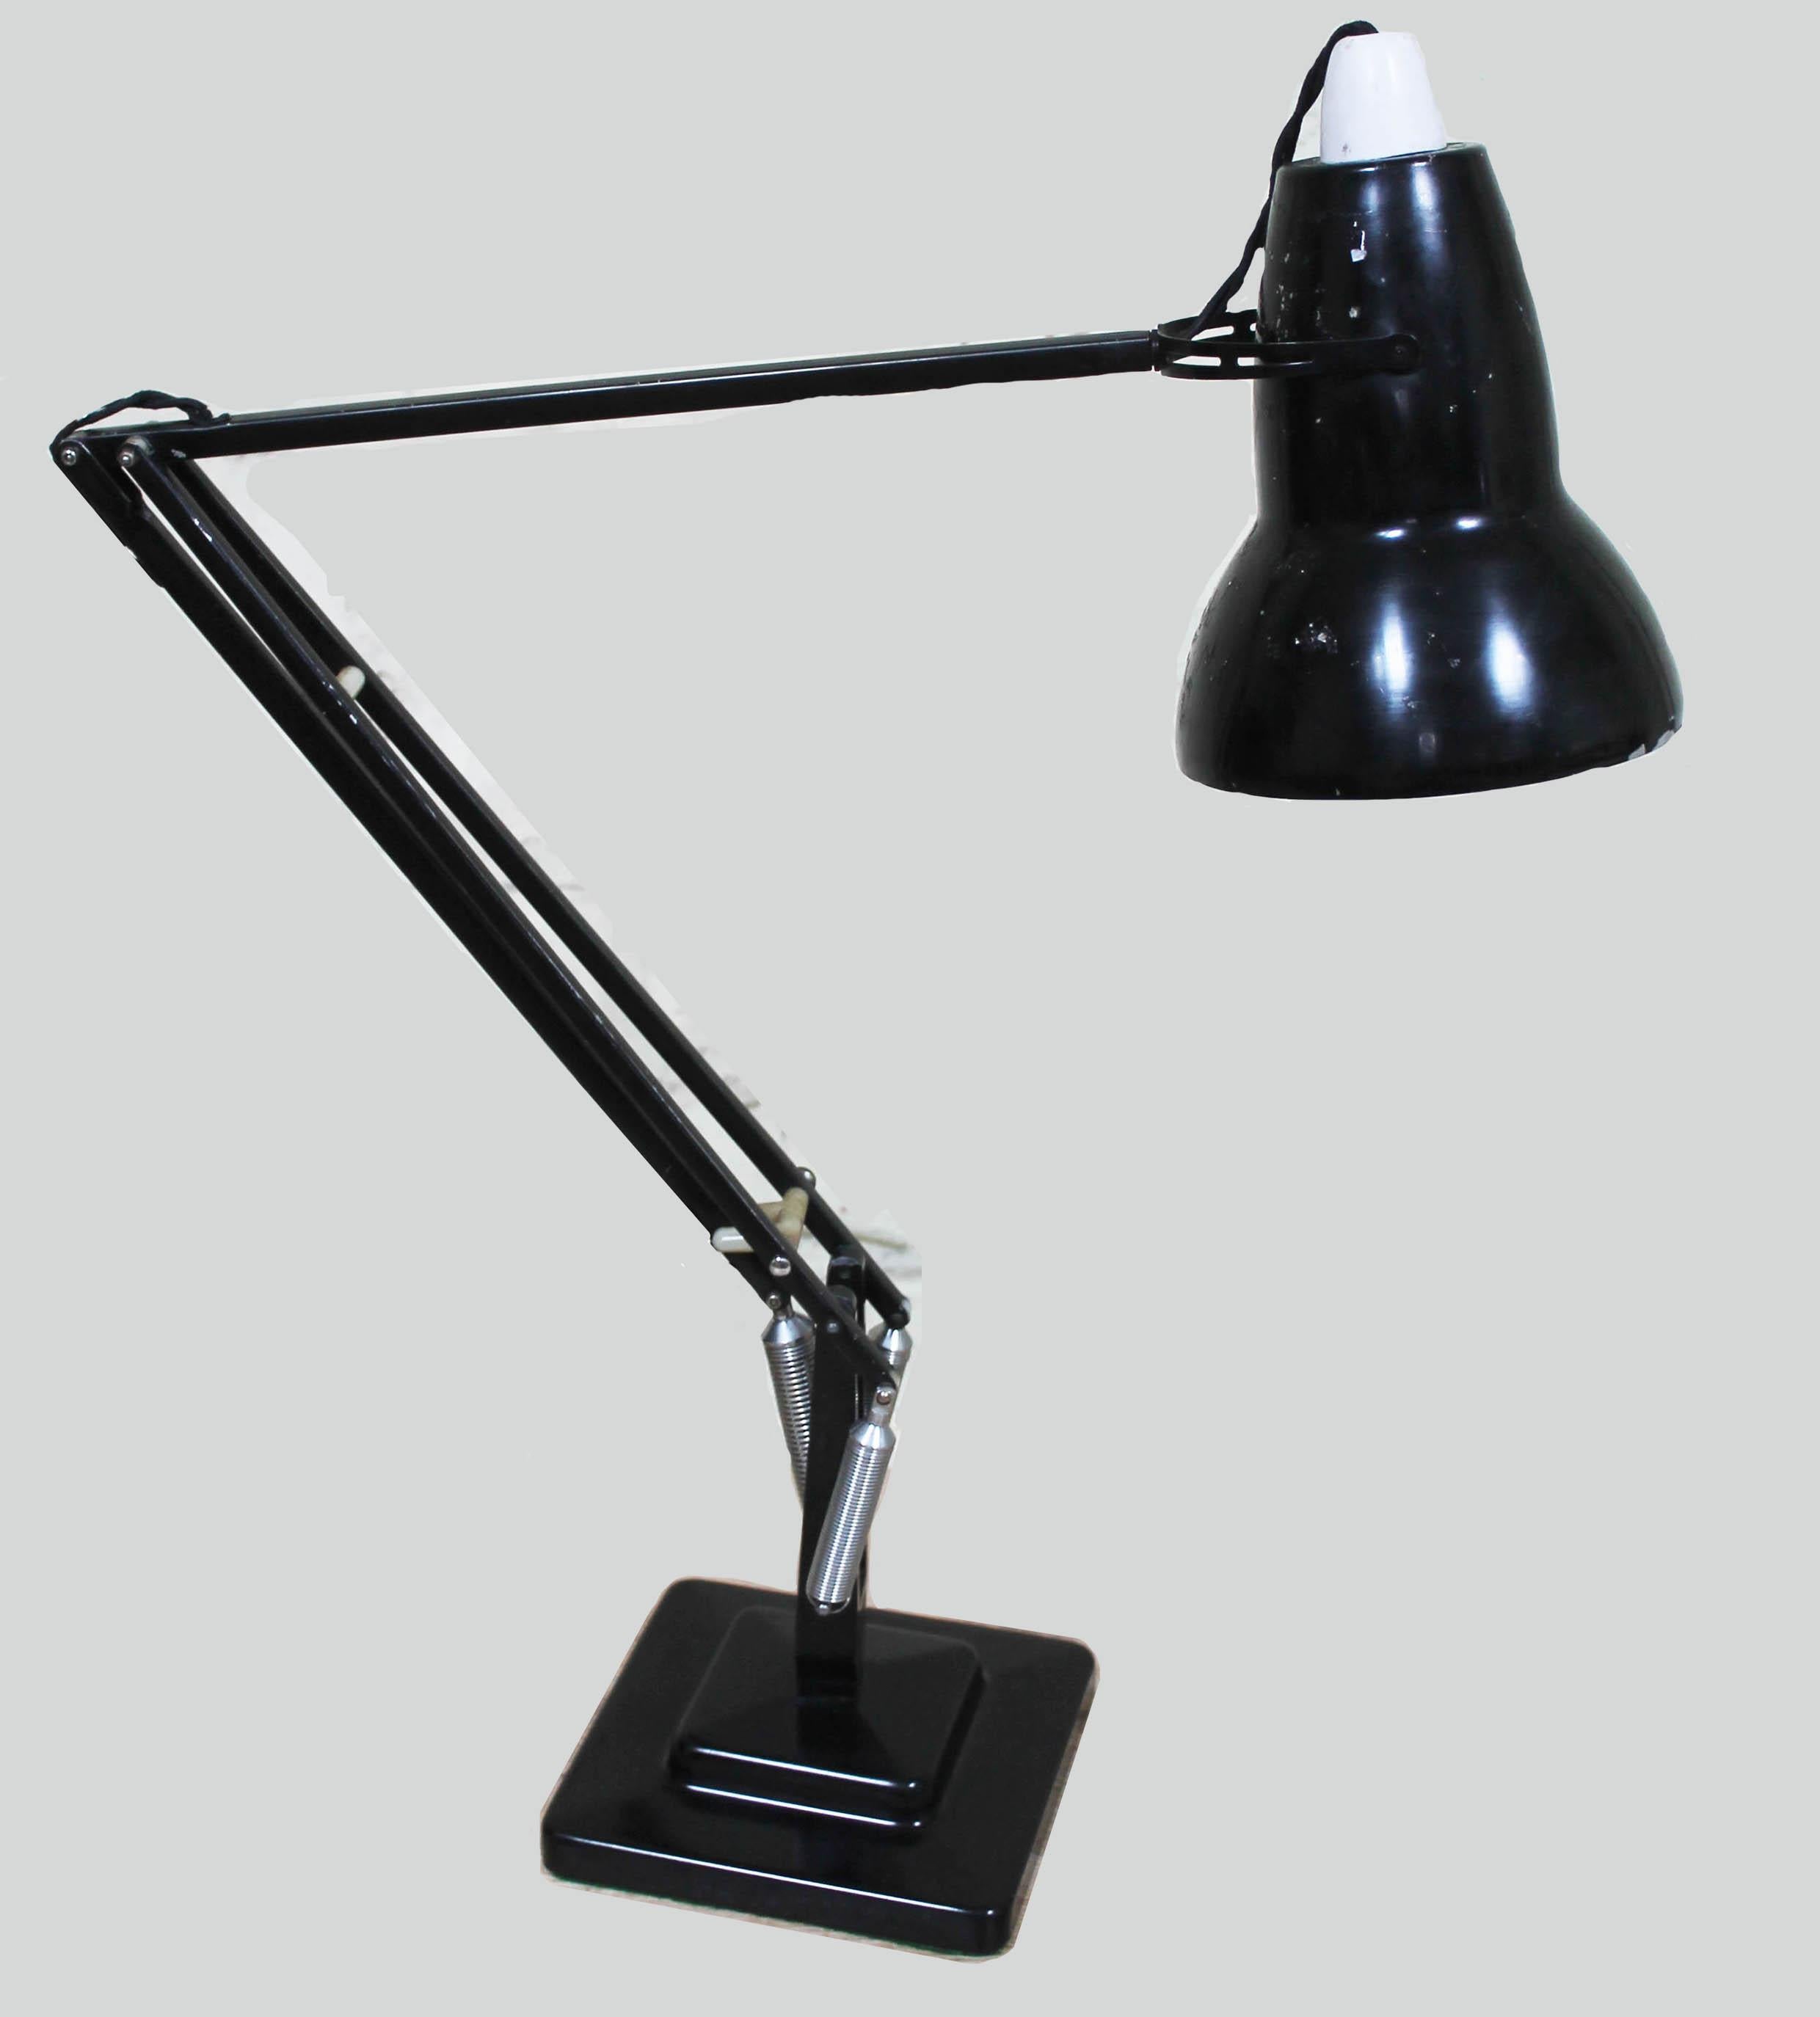 Art Deco Herbert Terry Anglepoise Model 1227 Black Two Step Articulated Desk Lamp 1930's  For Sale